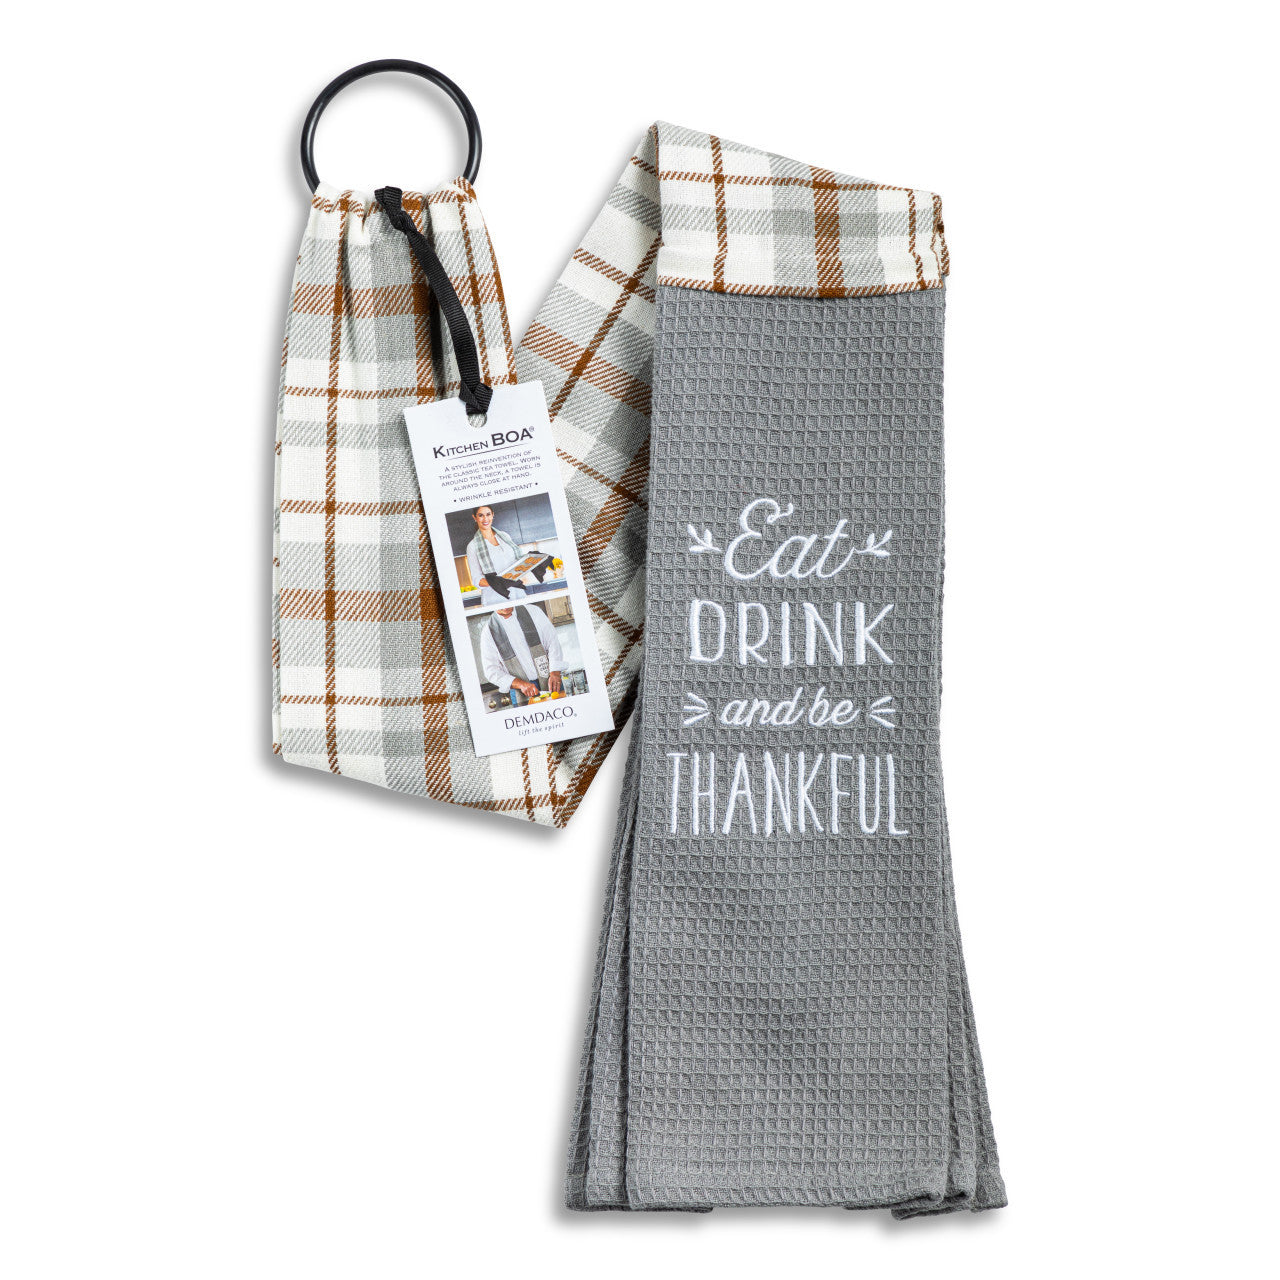 Be Thankful BOA – The Good Life Boutique